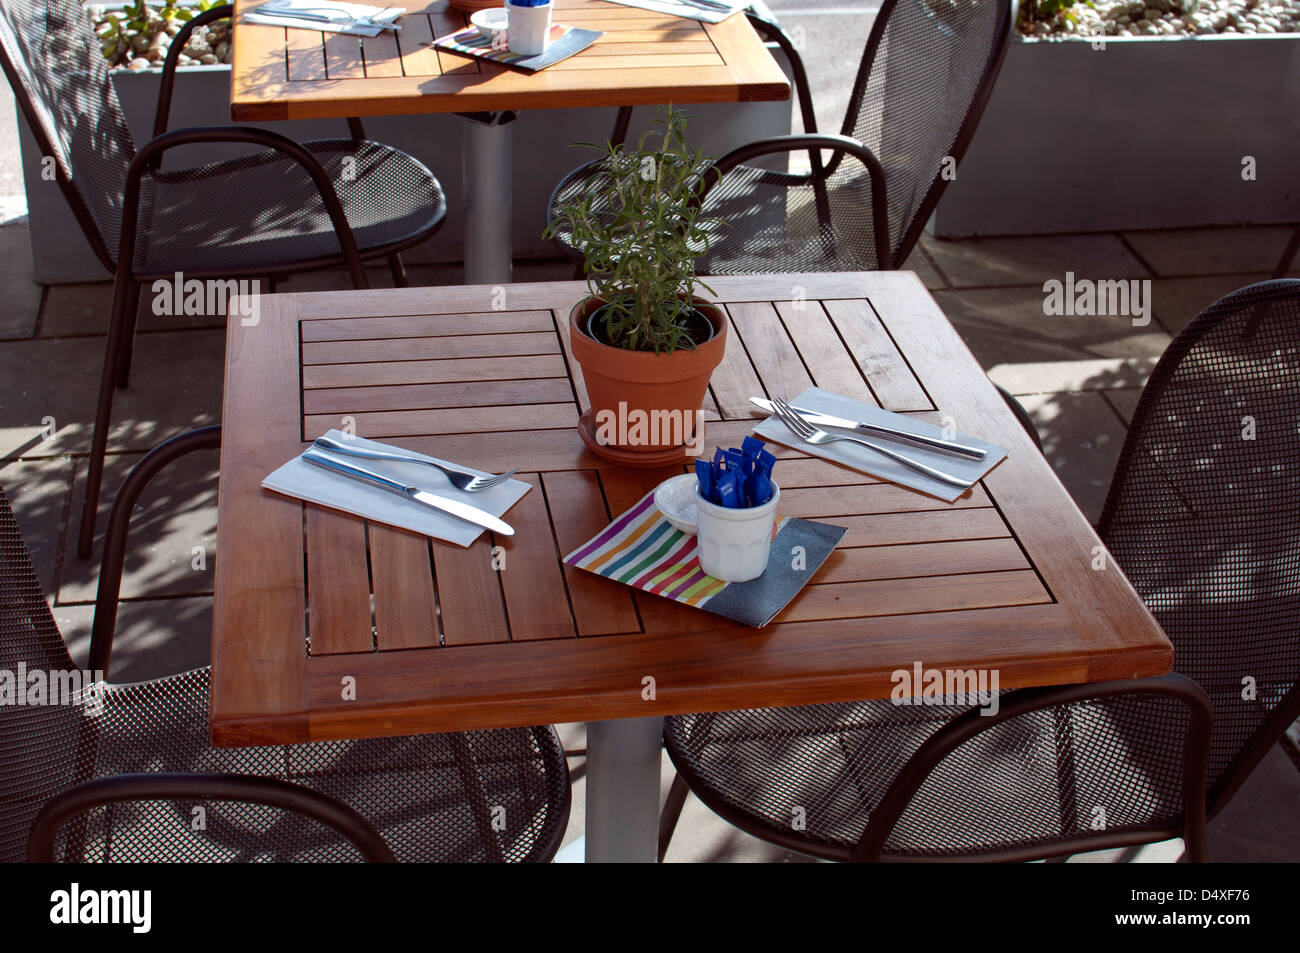 Cafe table setting Stock Photo